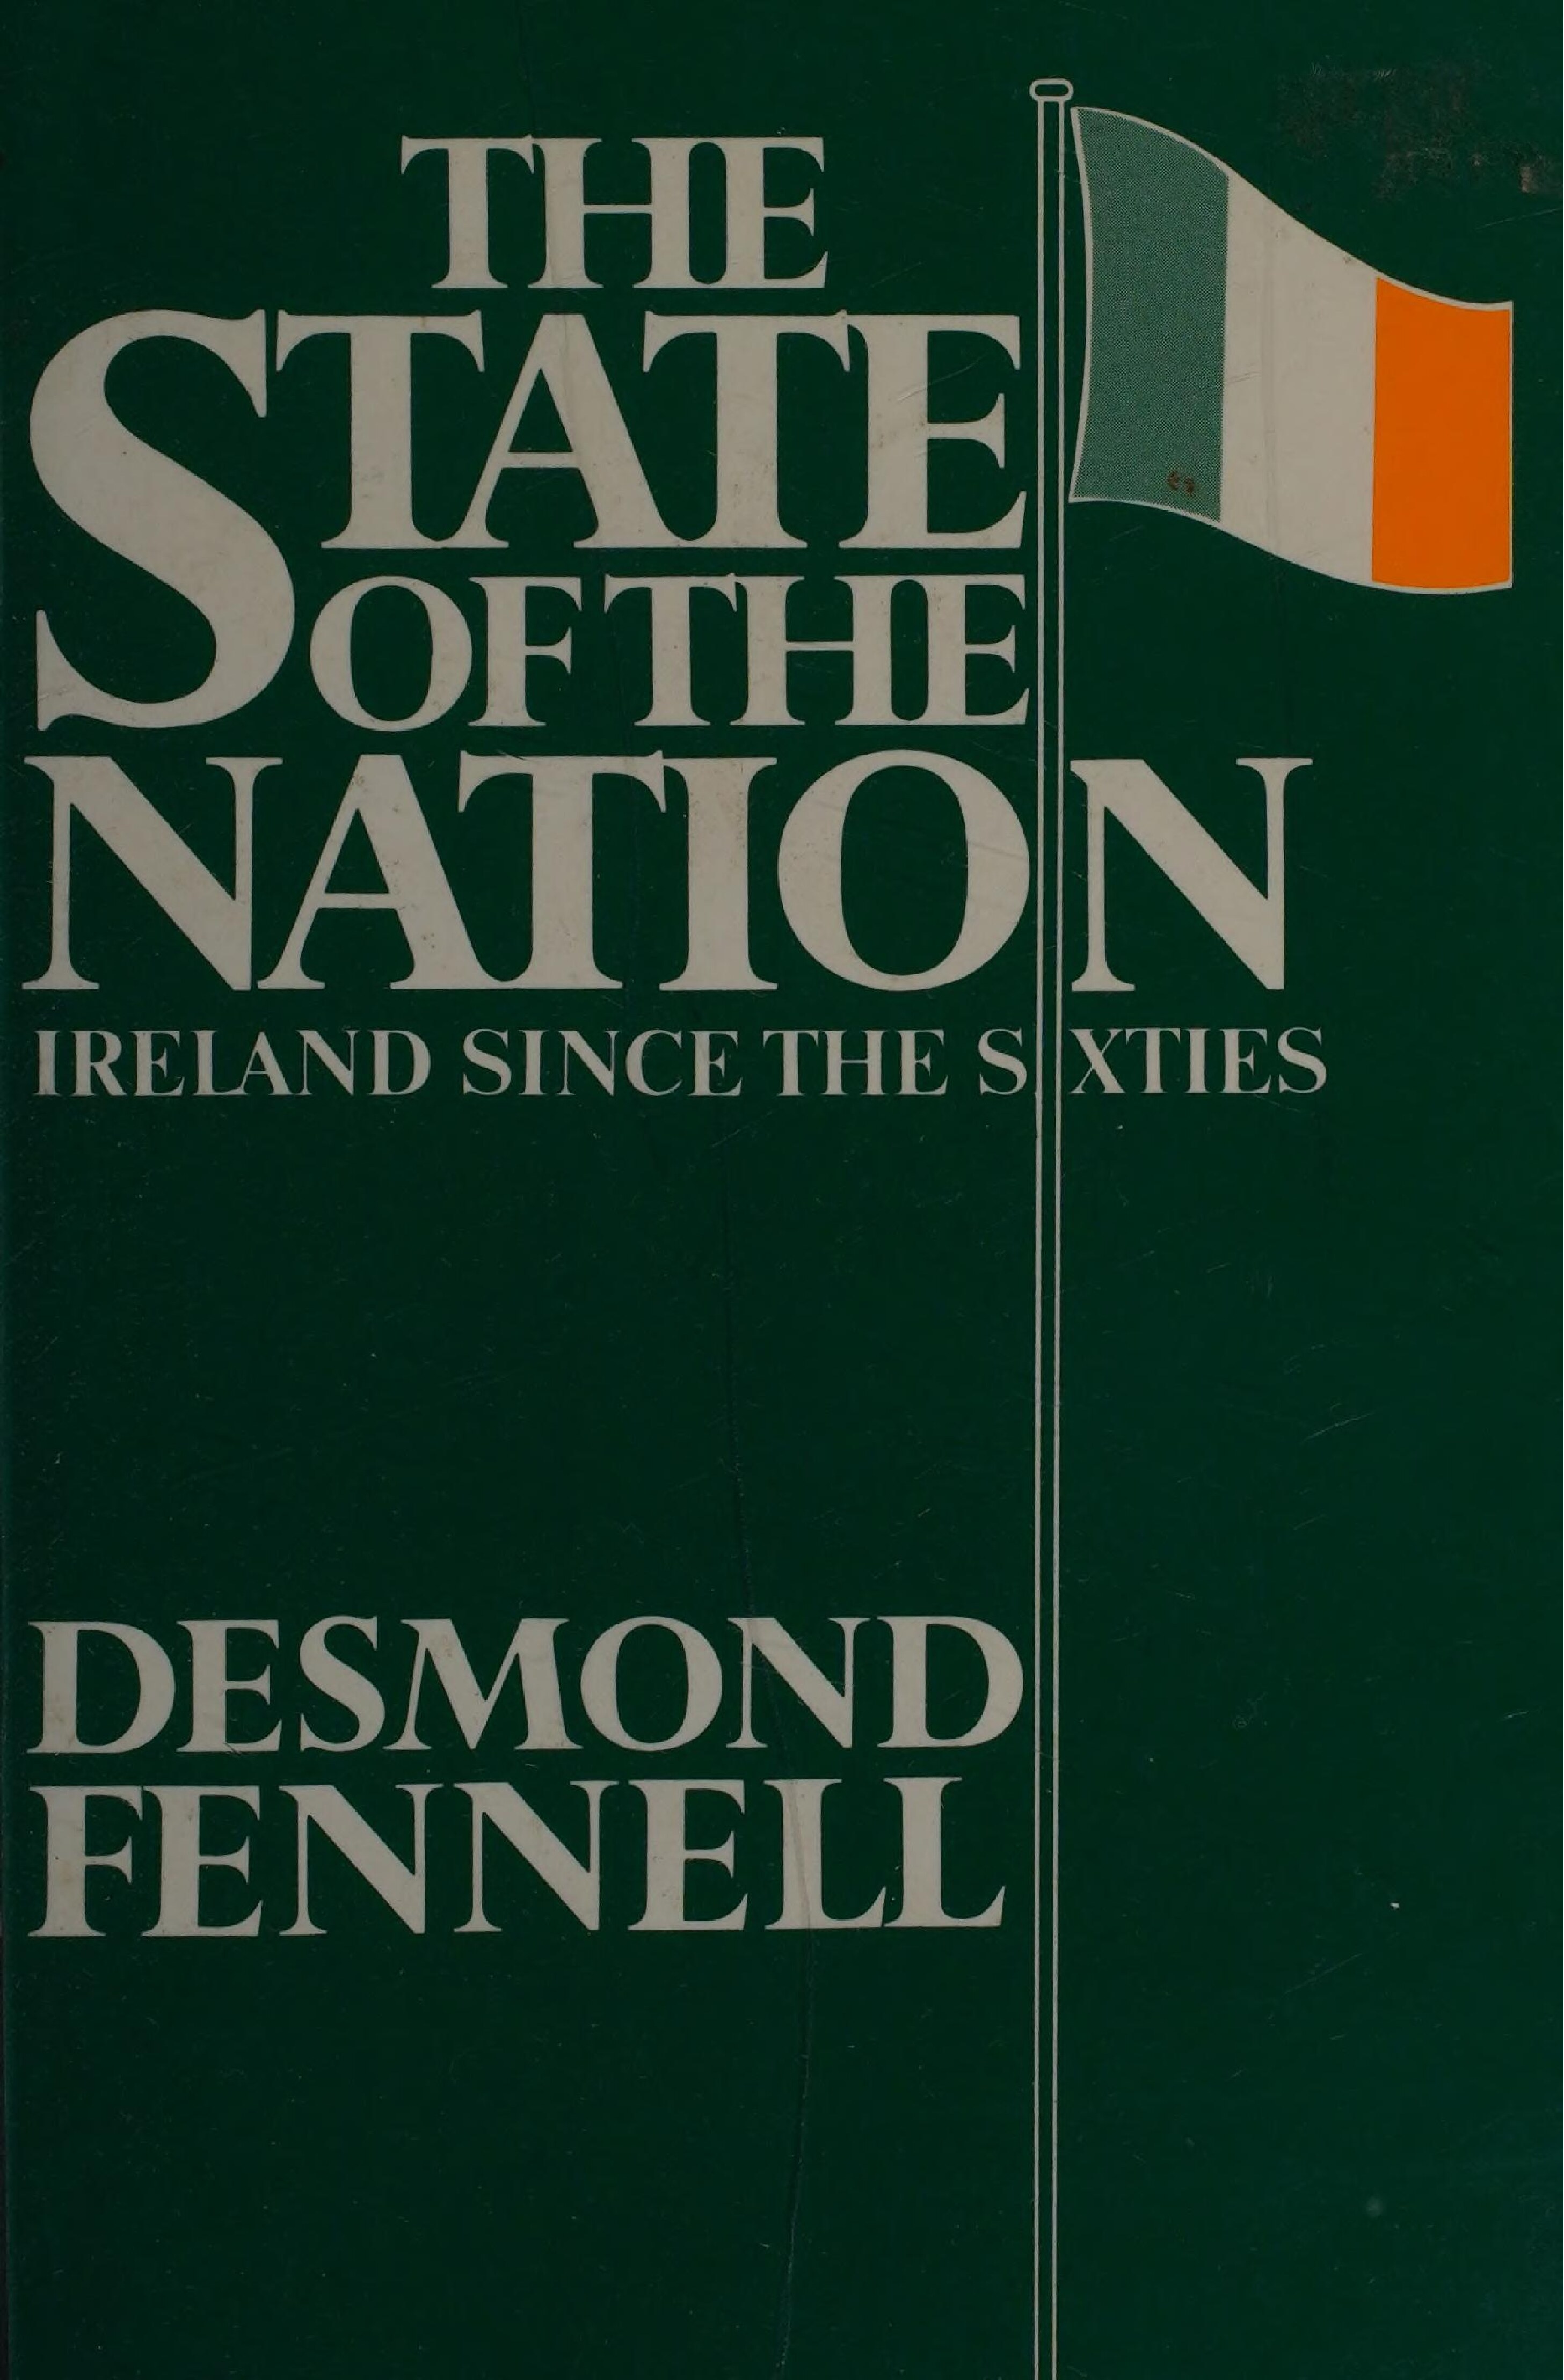 The State of the Nations - Ireland Since the Sixties